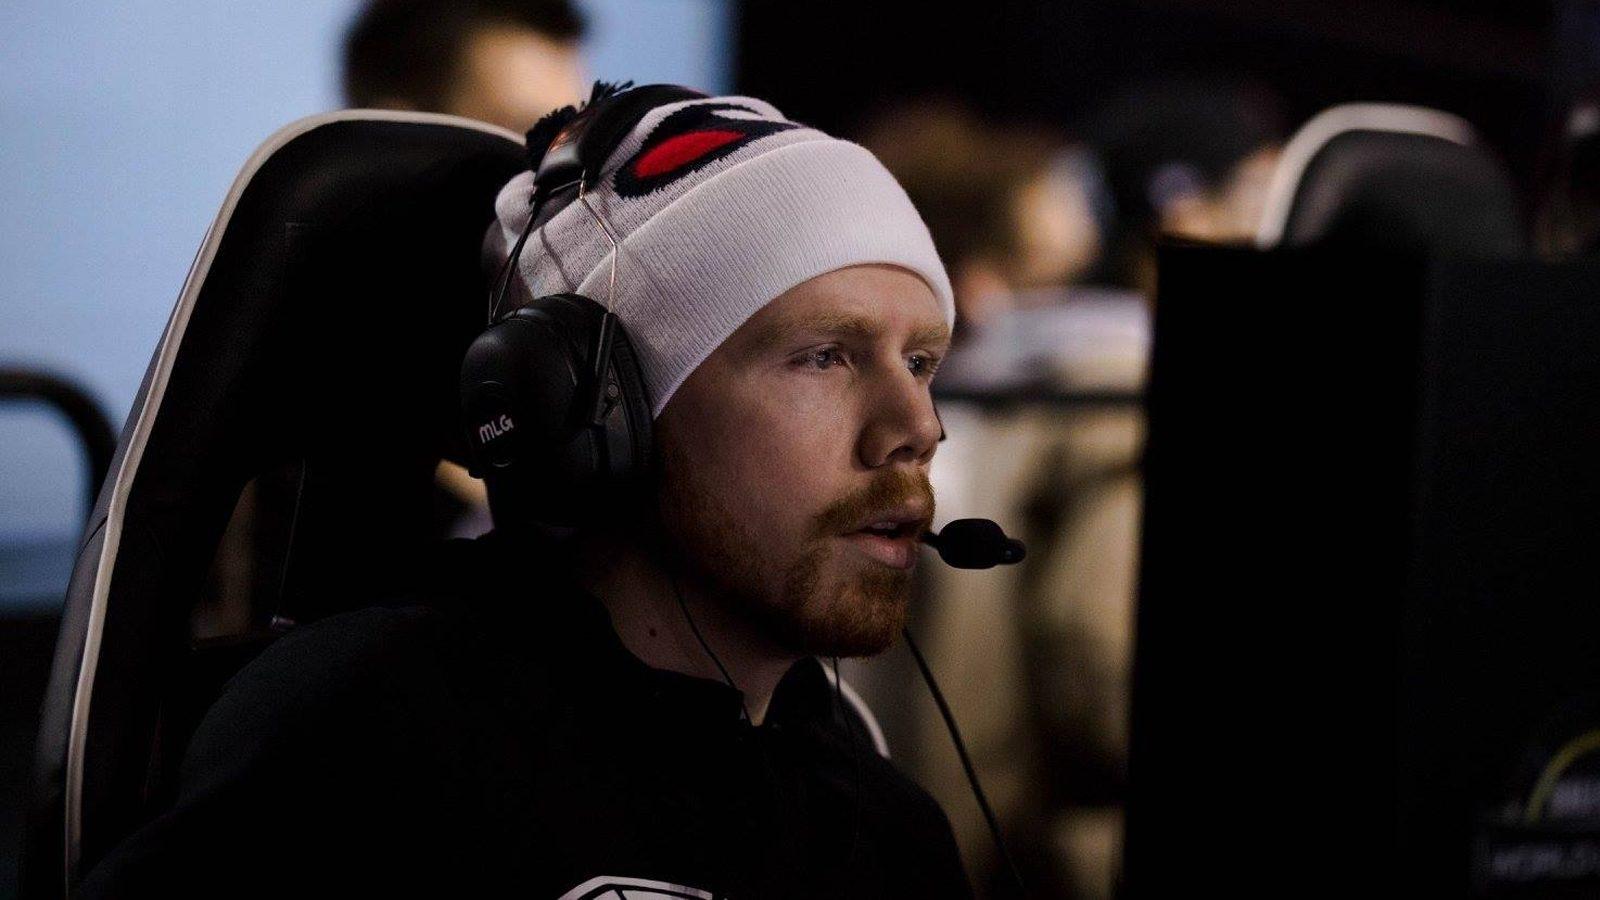 Enable competing at a Call of Duty event.